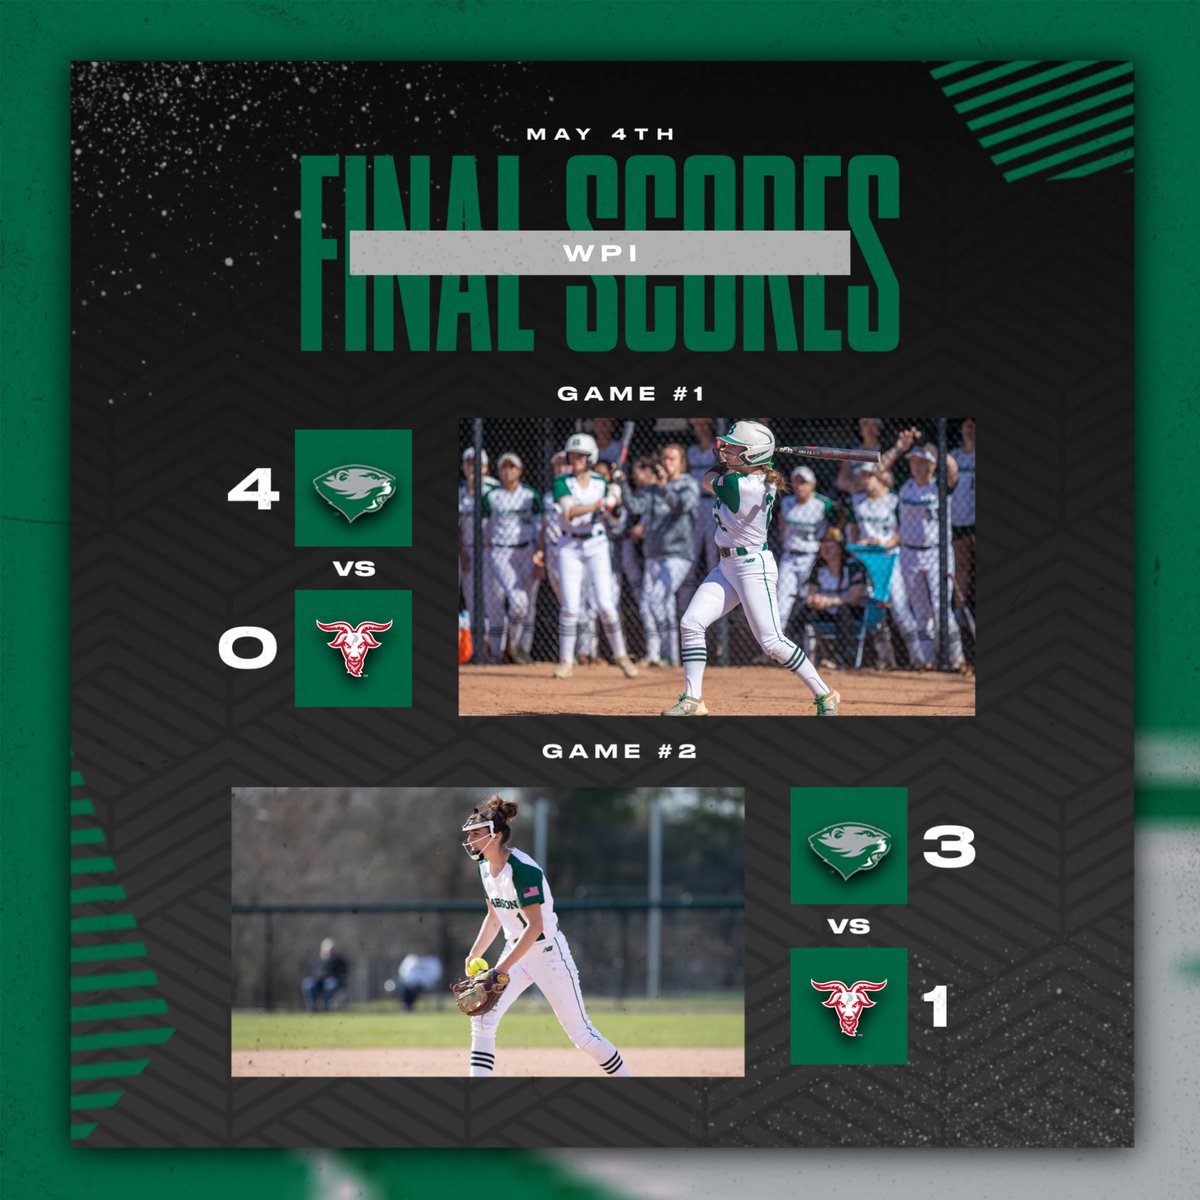 Another Beaver sweep in the books with continued outstanding performance on the mound and a big 6th inning hit against WPI!!🙌🏼🥎

#GoBabo #StrictlyBusiness #EveryDamDay